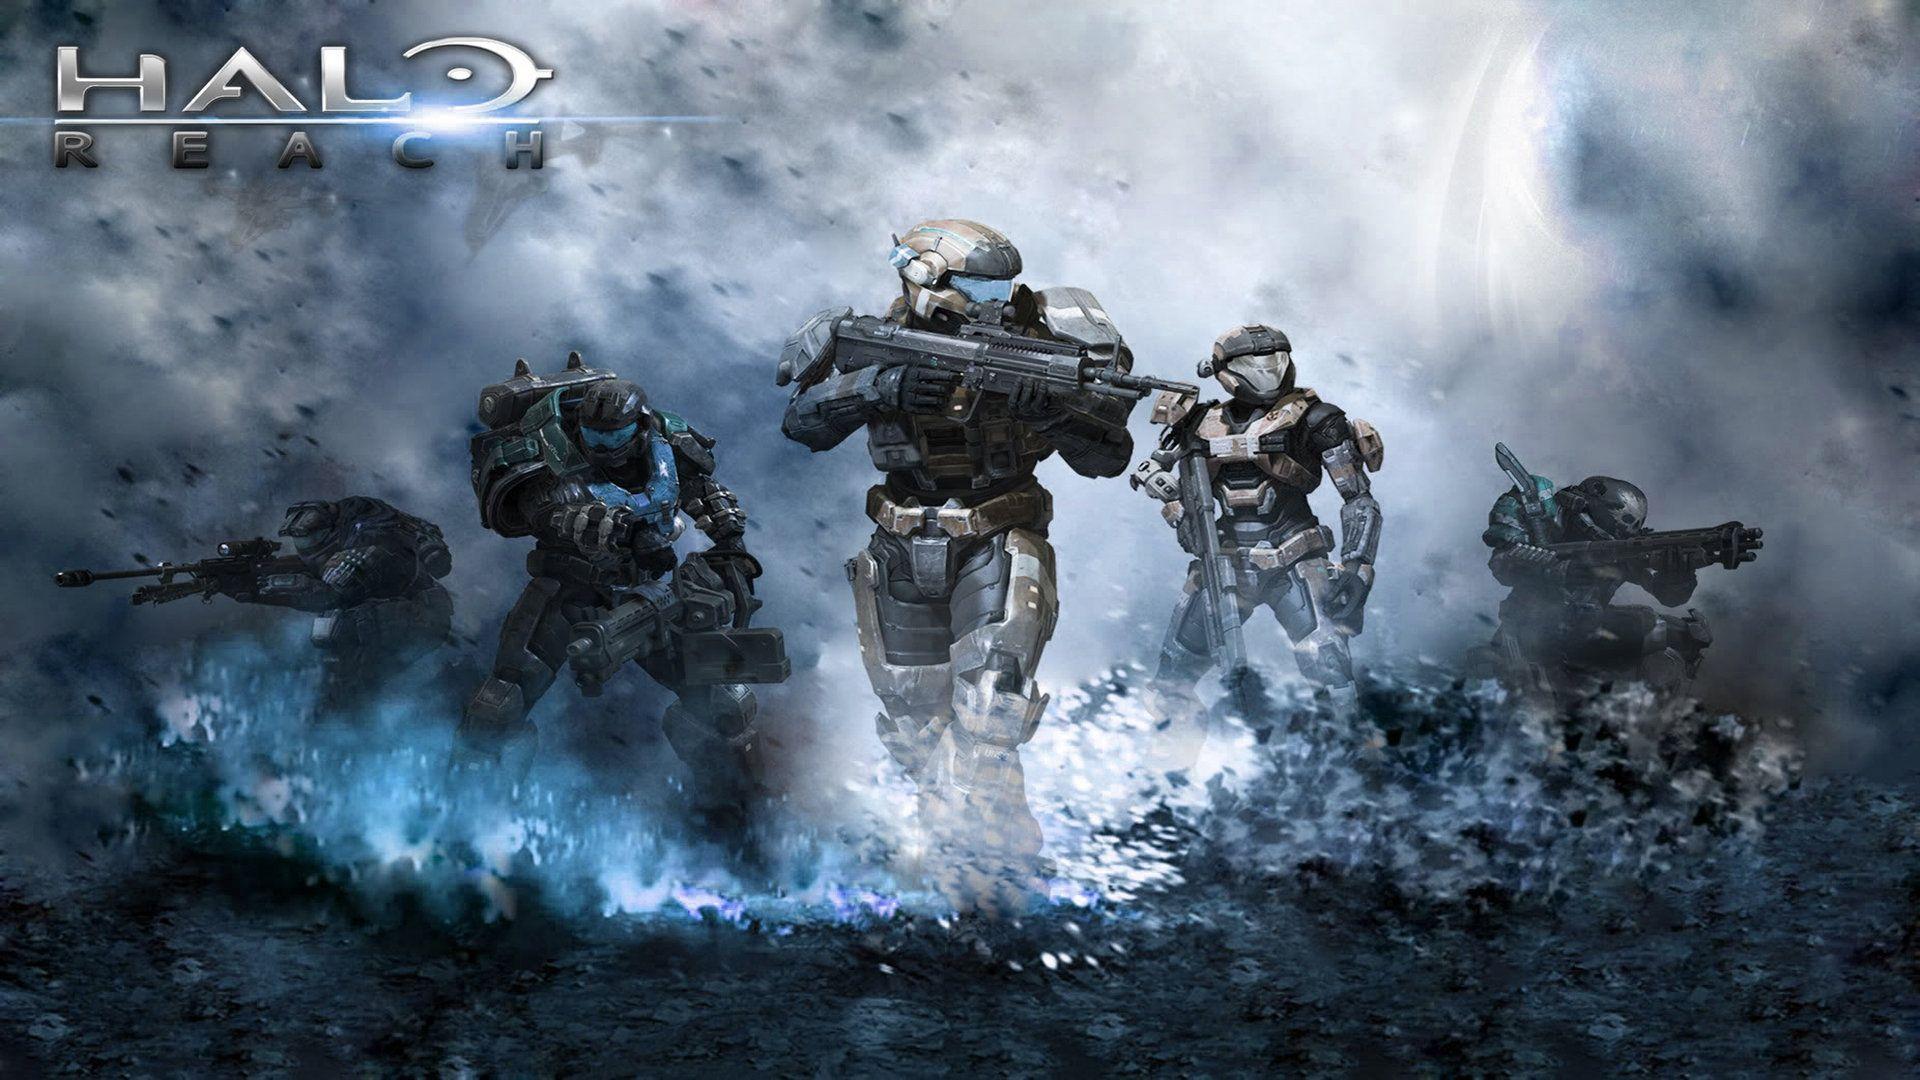 Wallpaper ID 343830  Video Game Halo Reach Phone Wallpaper  1170x2532  free download